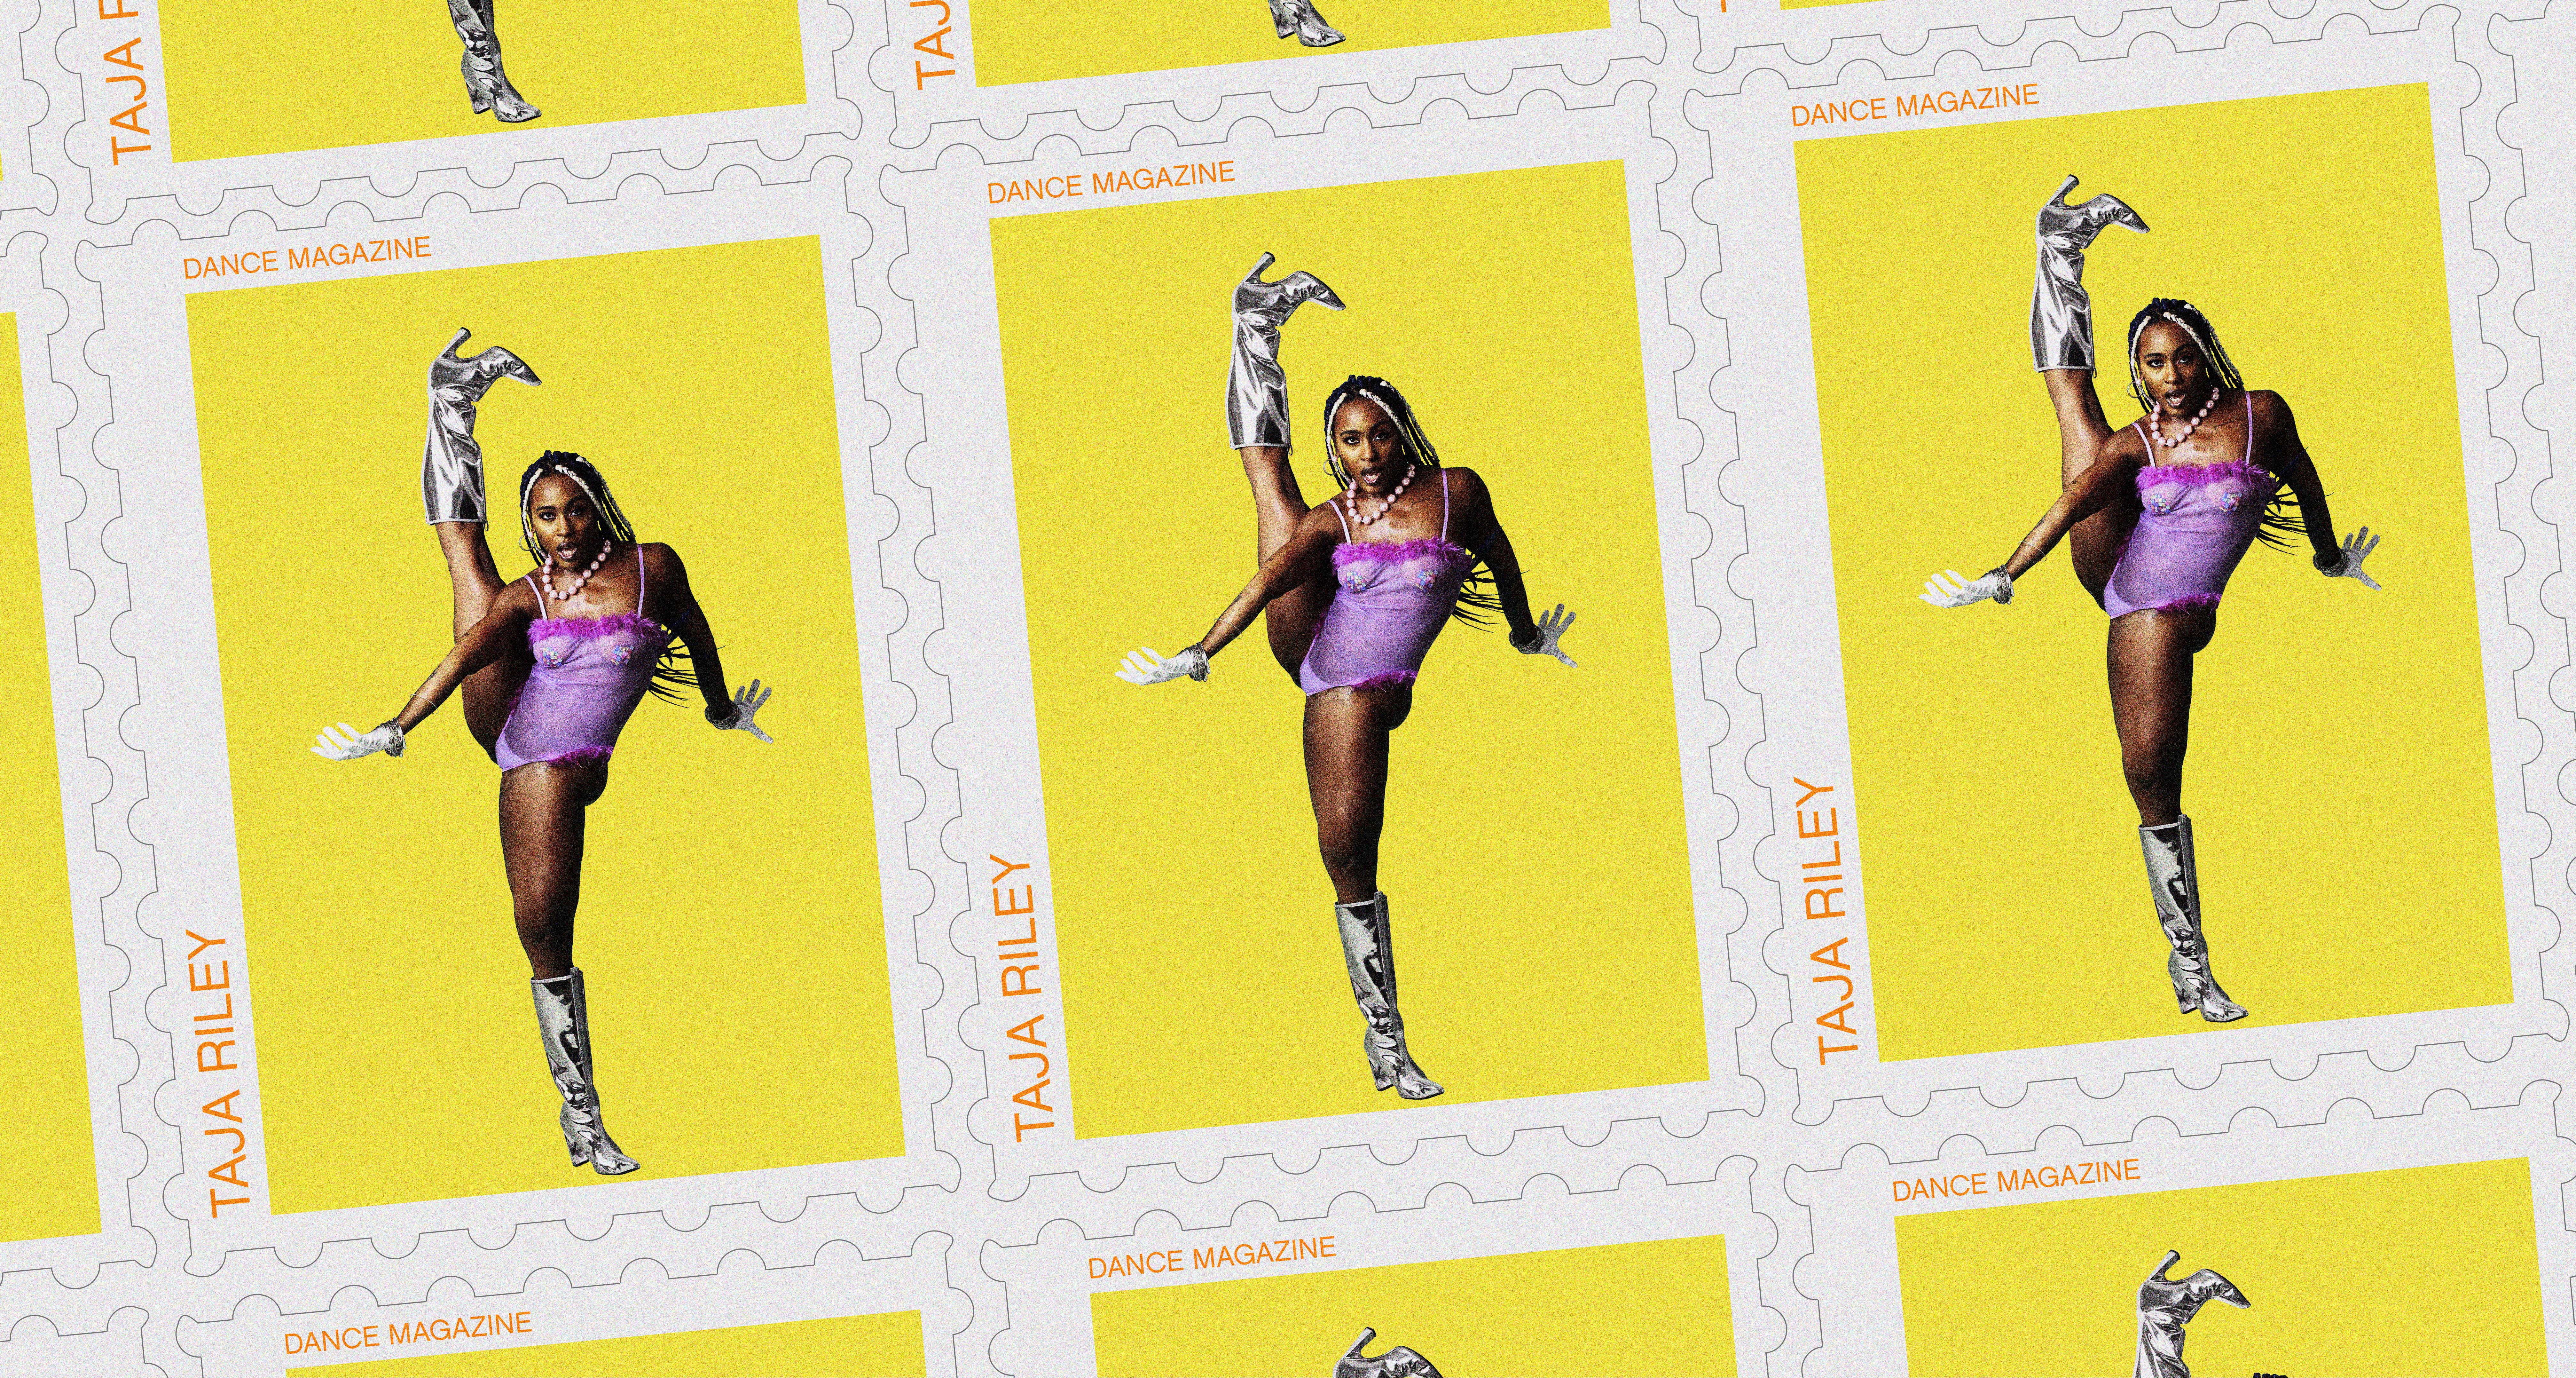 A photo of Taja in a high kick is duplicated on multiple postage stamps.